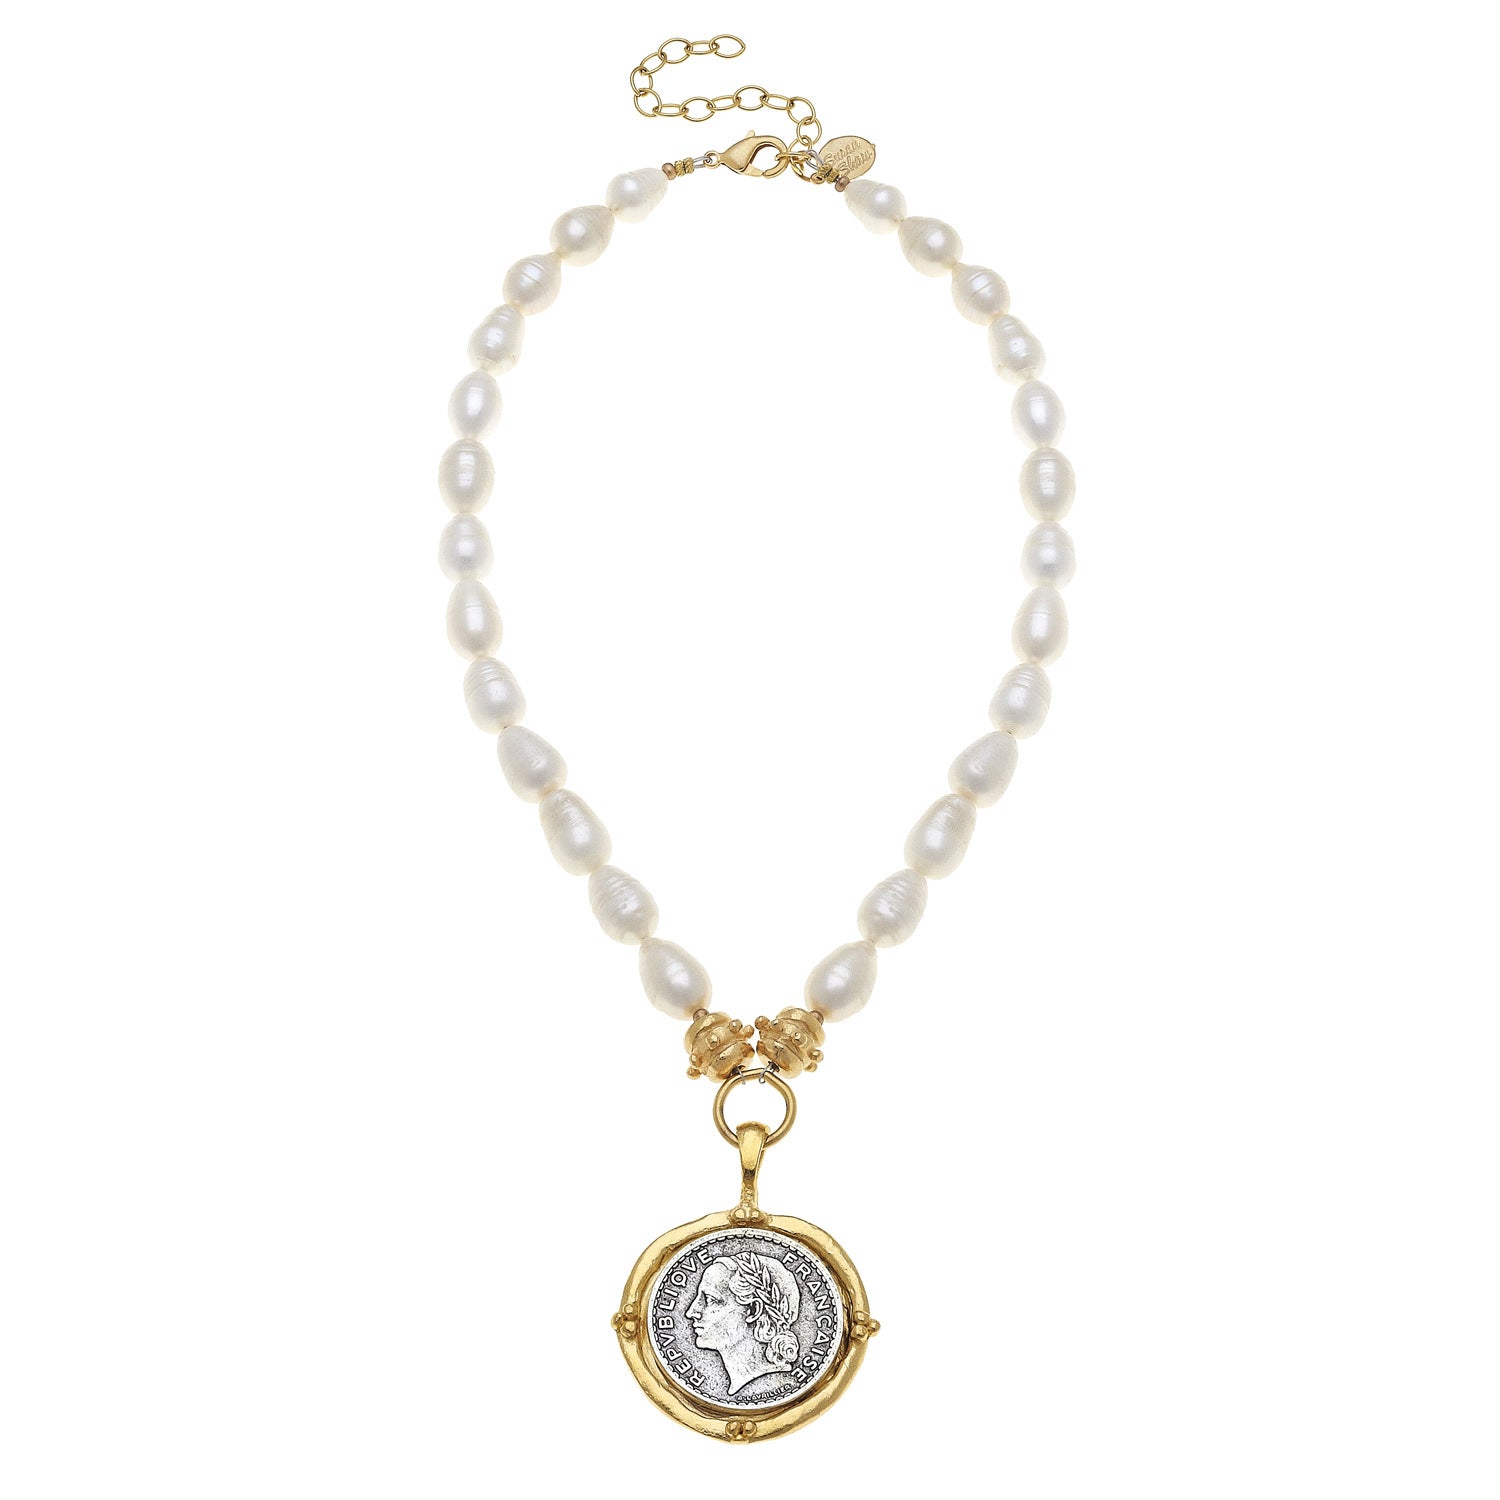 Susan Shaw Jewelry Handcast Portrait Coin Necklace with Freshwater Pearls